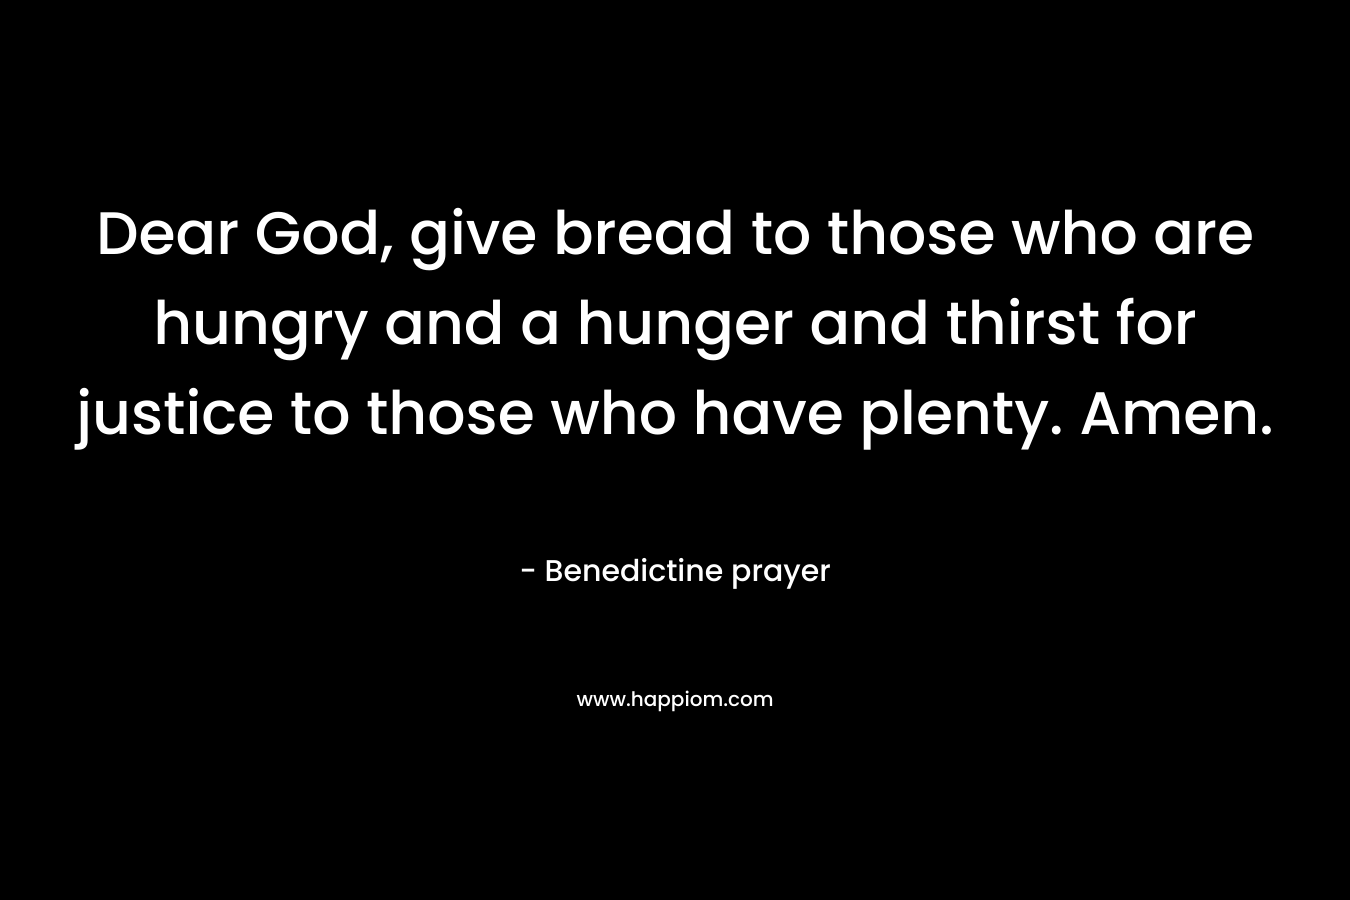 Dear God, give bread to those who are hungry and a hunger and thirst for justice to those who have plenty. Amen.